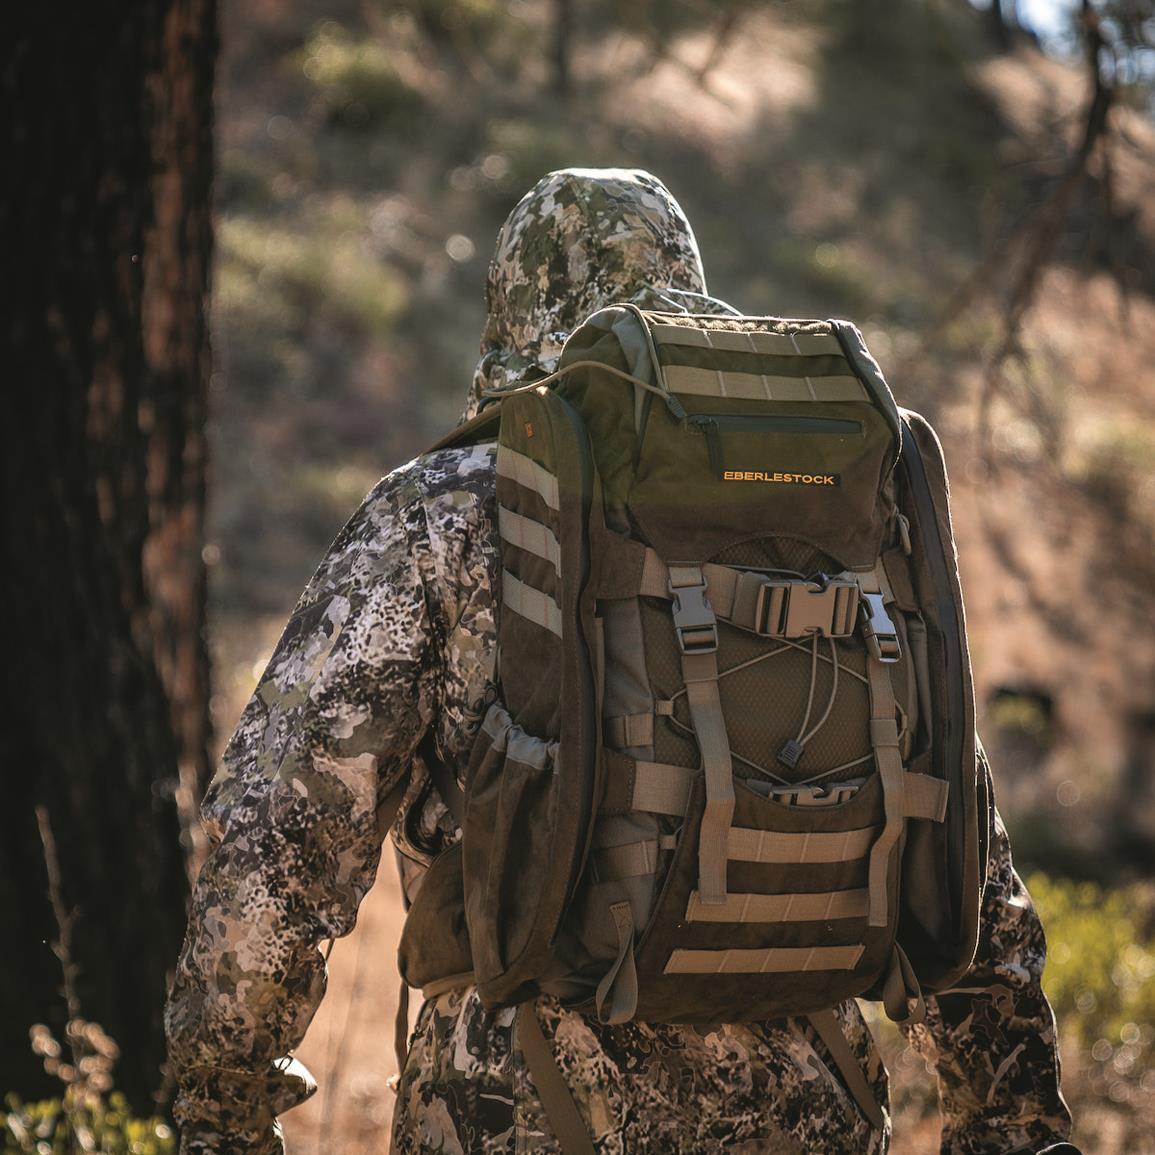 Cactus Jack XL Assault Pack - 614669, Military Style Backpacks & Bags ...